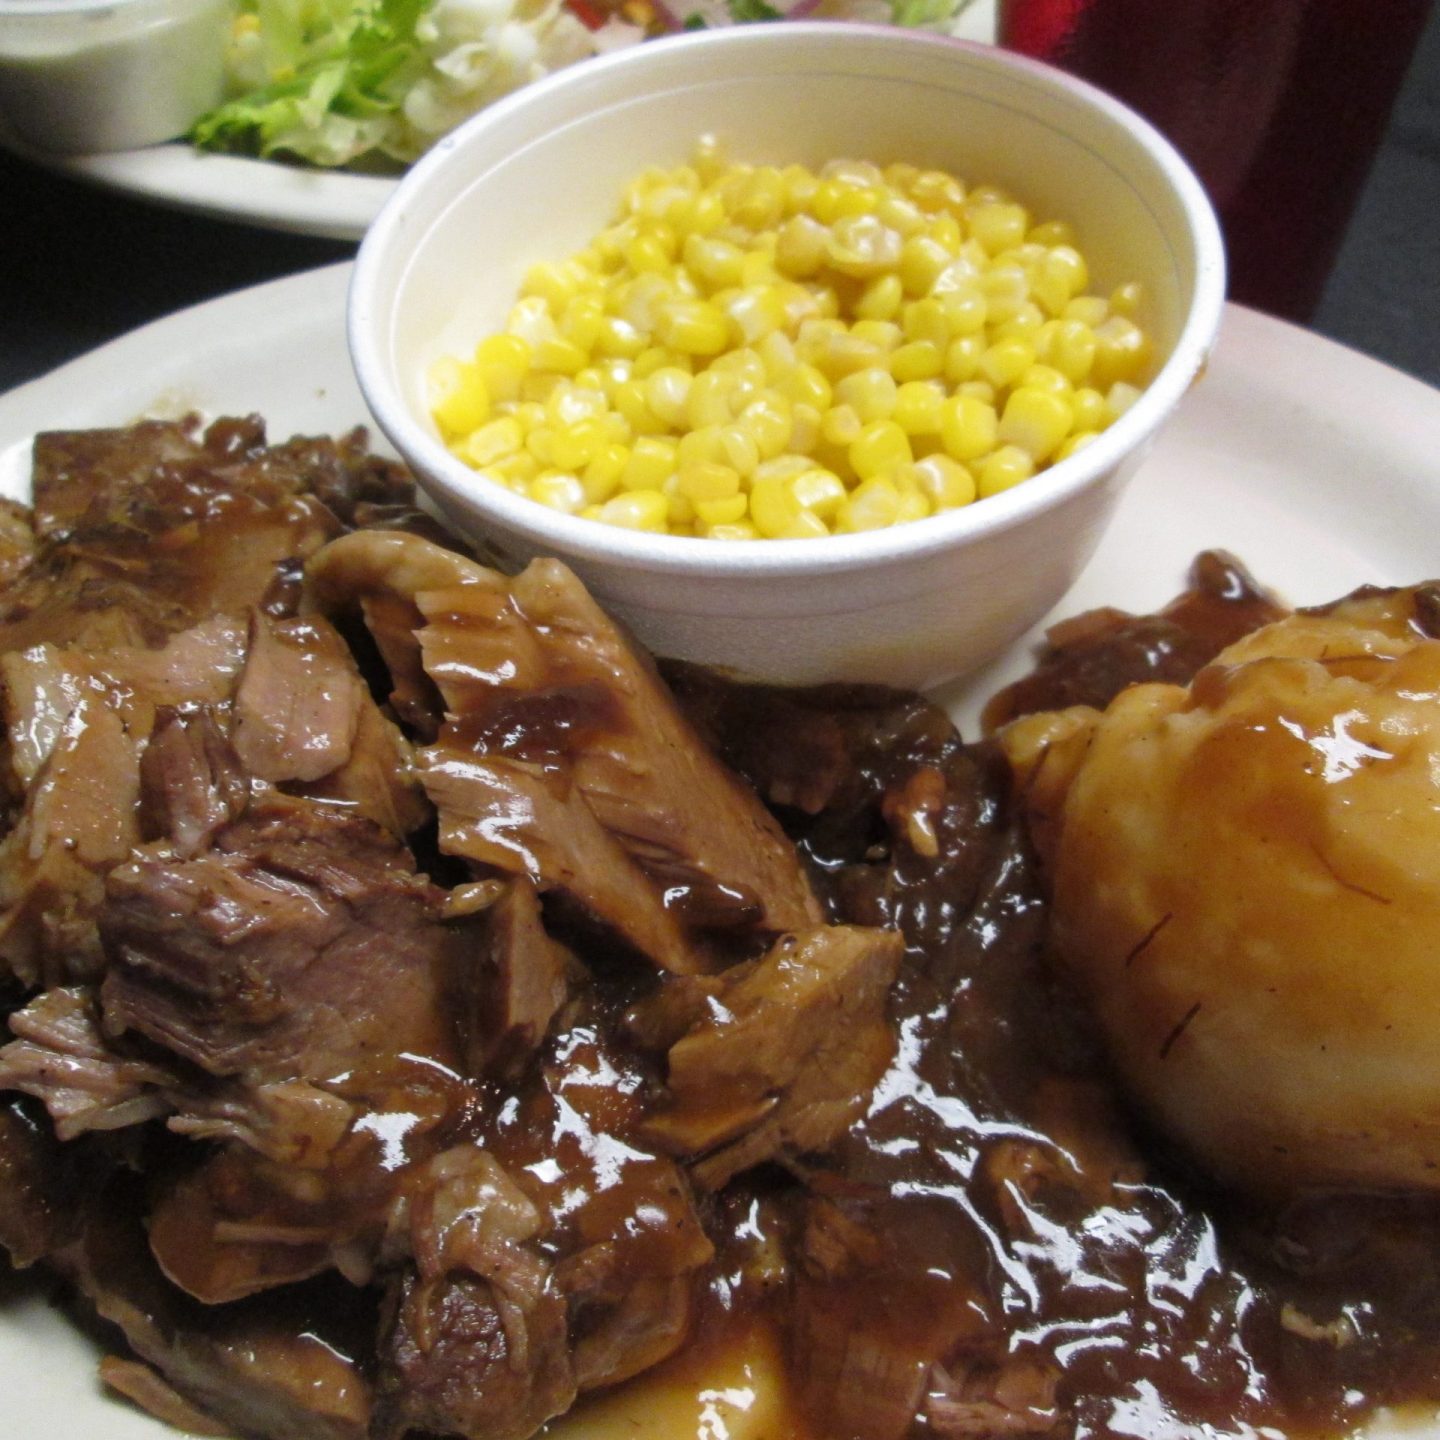 Oscar's open faced roast beef brisket - corn, salad and mashed potatoes